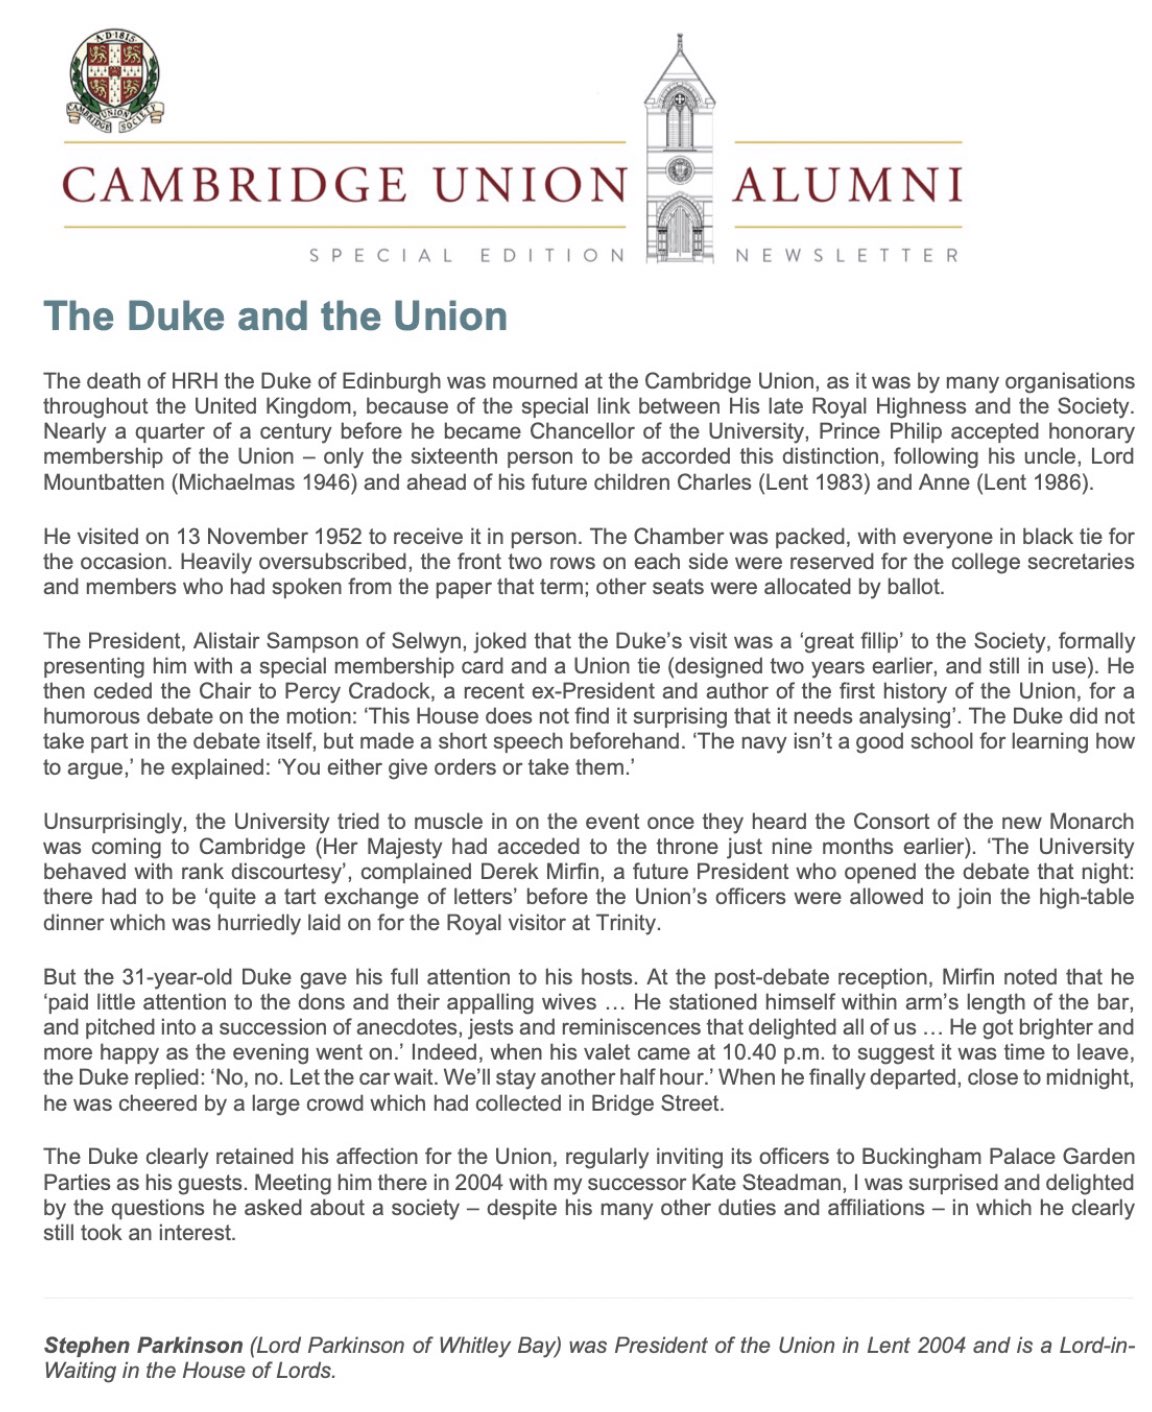 on Twitter: "Lord Parkinson written this beautiful piece in memory of HRH Prince Philip, Duke of Edinburgh | Special Edition Cambridge Alumni Newsletter @cambridgeunion https://t.co/wuAjckmR4A" / Twitter